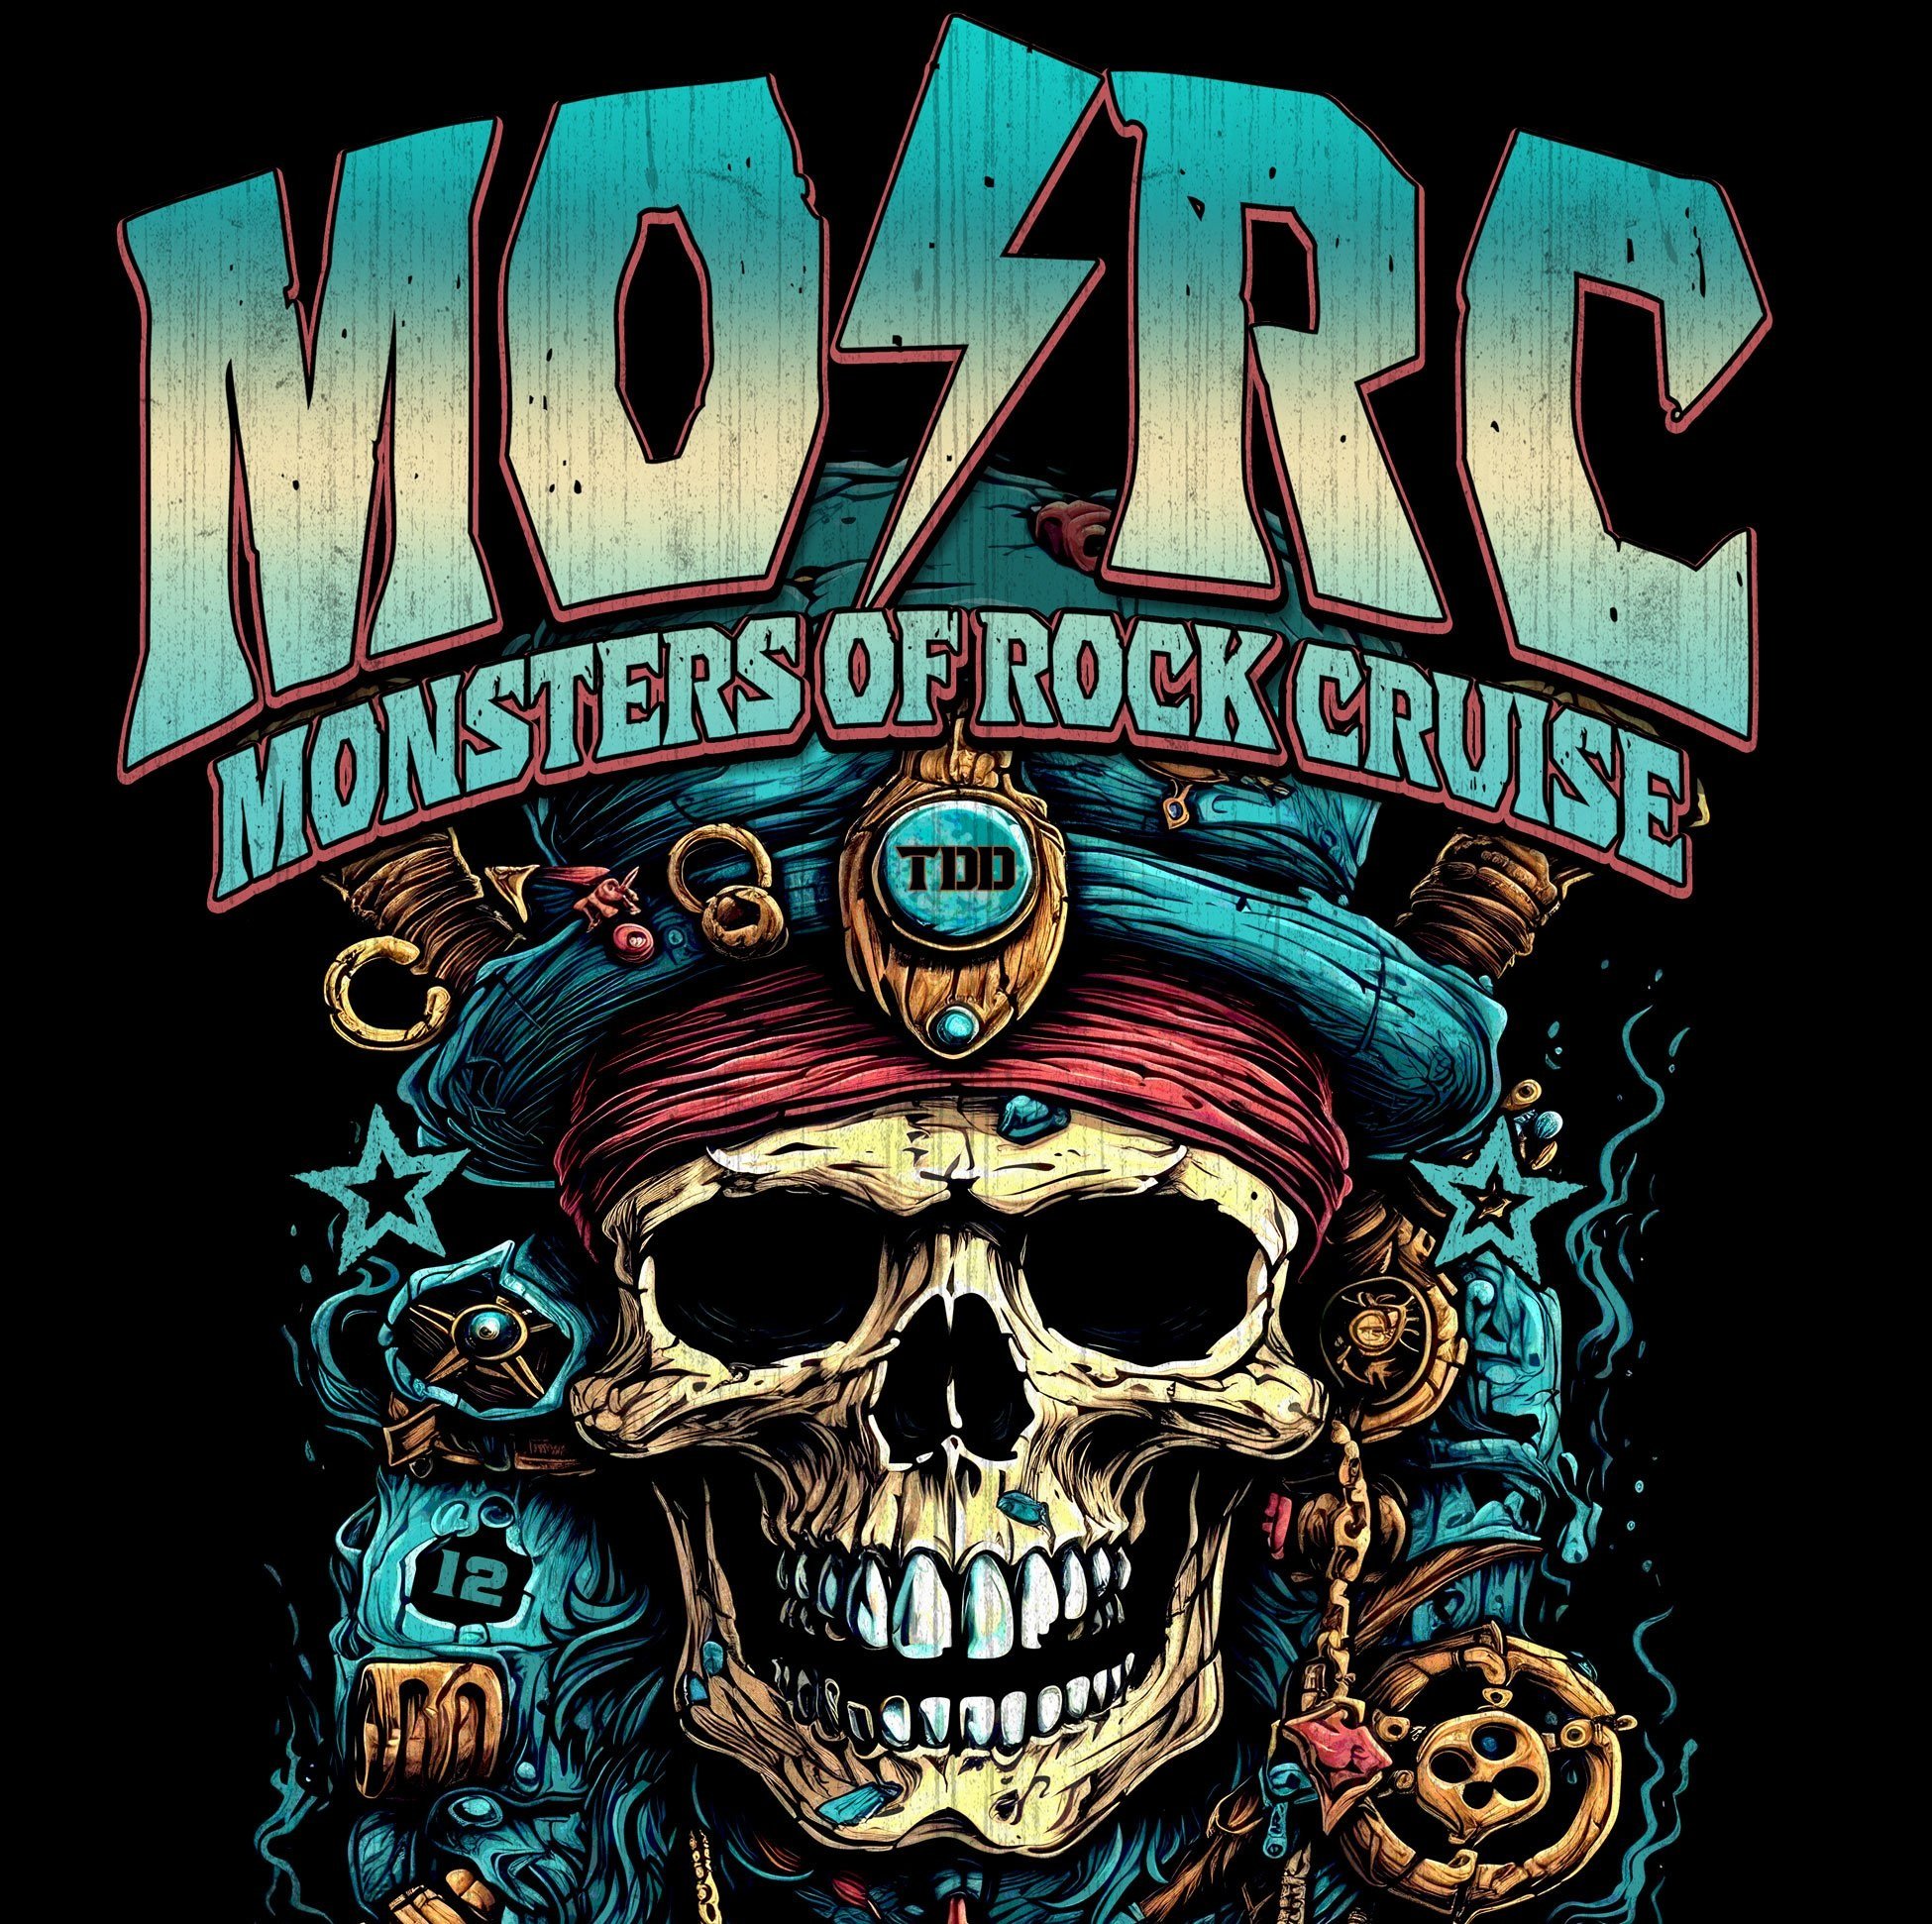 MONSTERS OF ROCK CRUISE